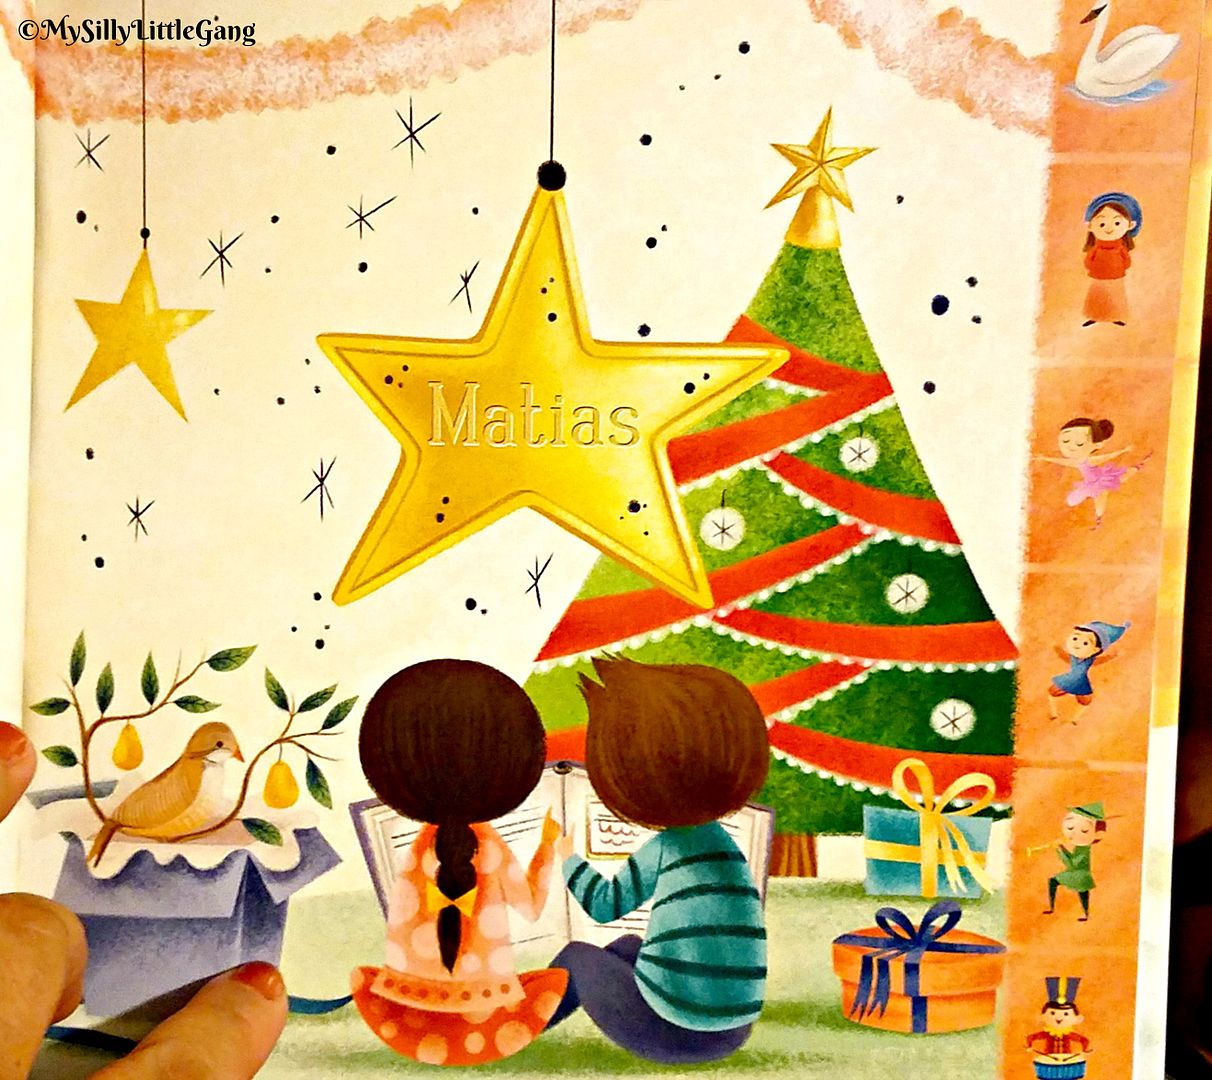 Christmas sing-along personalized book